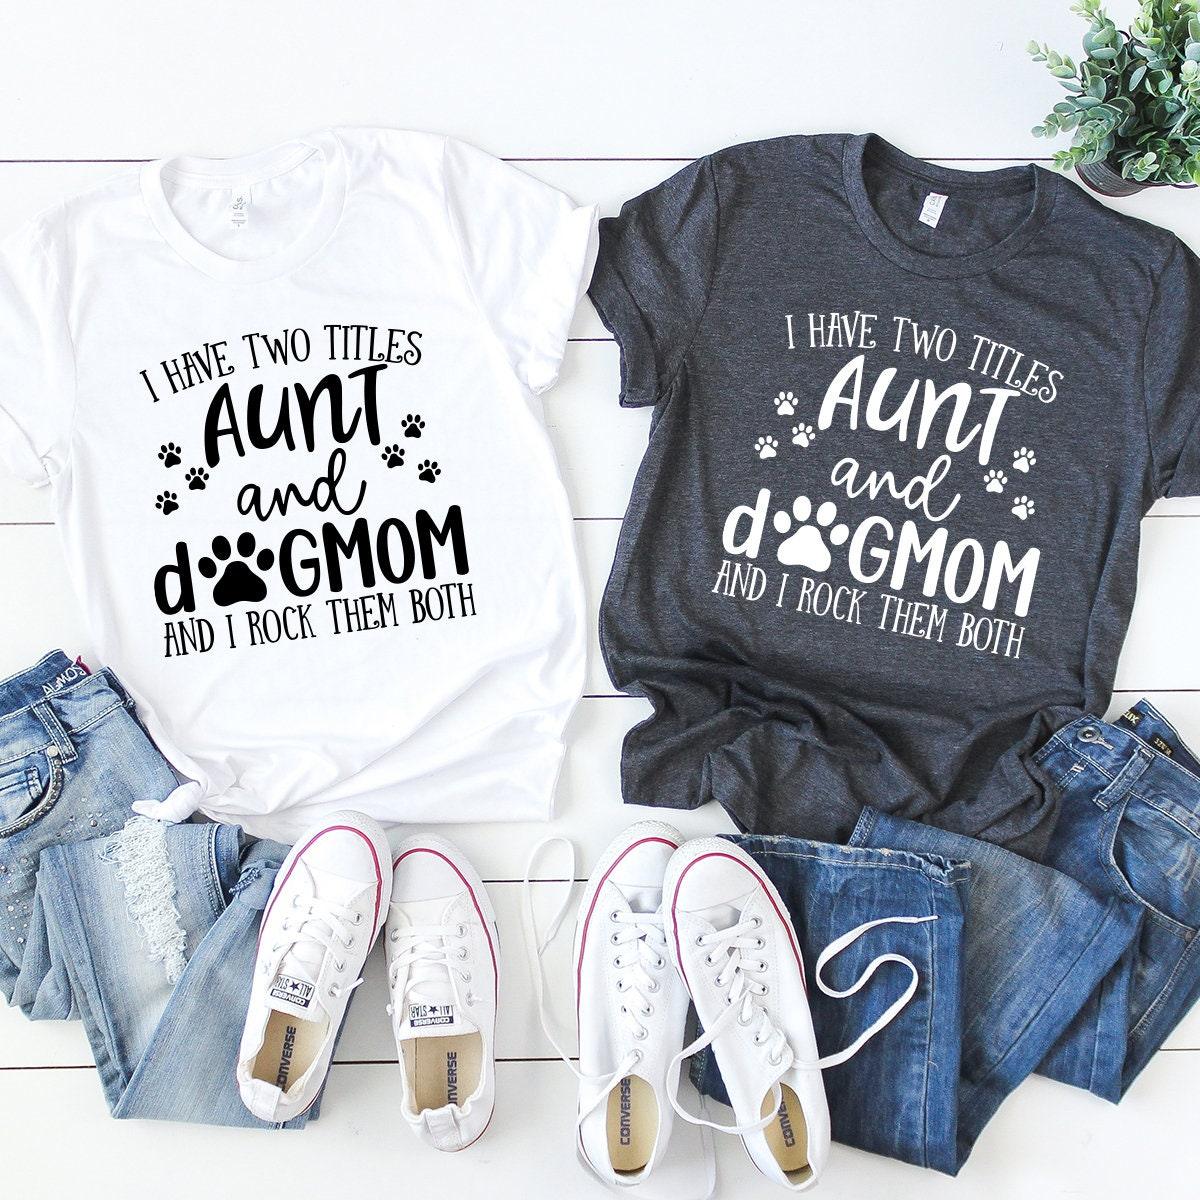 Aunt And Dog Mom T-Shirt, I Have Two Titles Aunt And Dog Mom Shirt, Dog Lover Auntie Gift, Cute Aunt Shirt, Funny Dog Aunt T Shirt - Fastdeliverytees.com